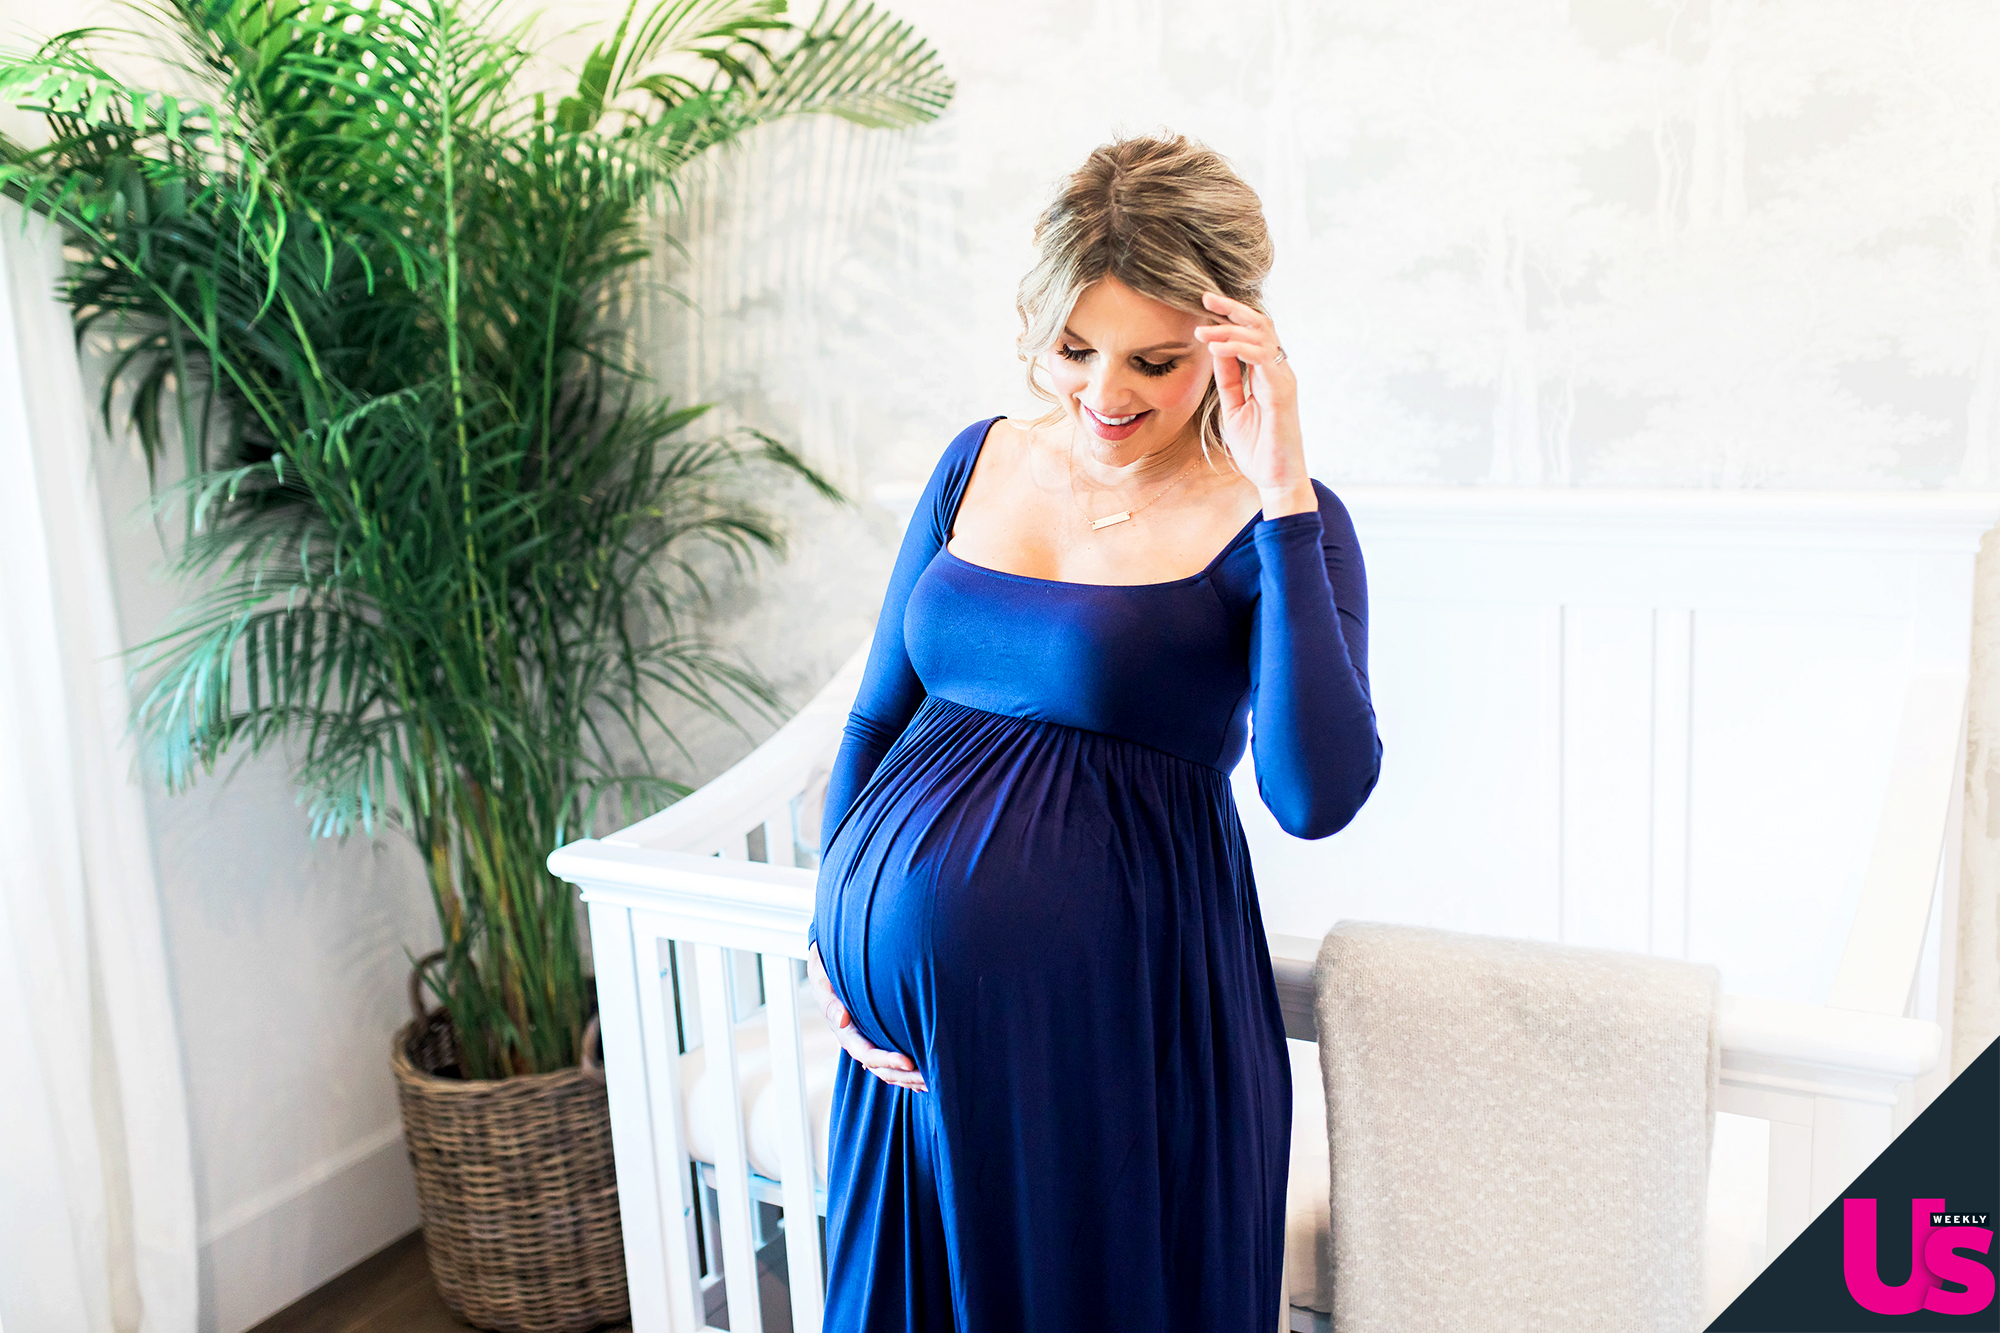 Pregnant Ali Fedotowsky Reveals Her Son’s ‘classic’ Nursery Pics